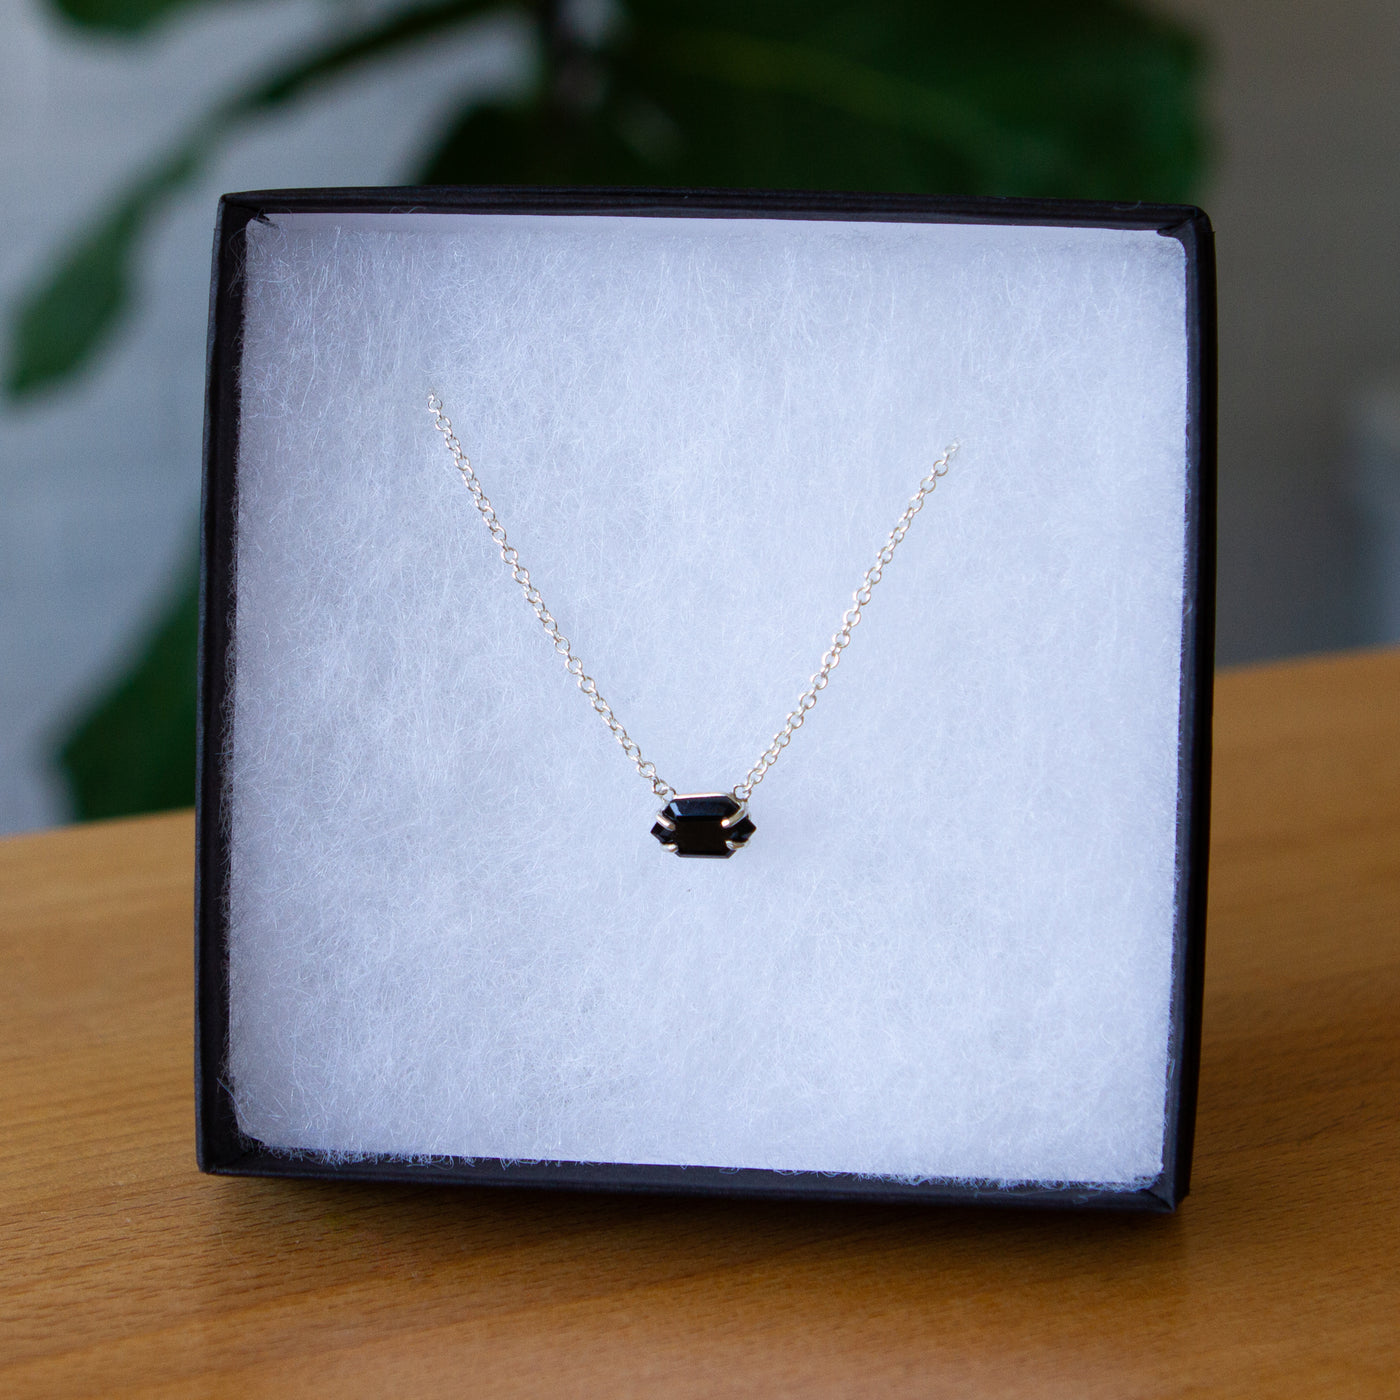 Emerson Black Garnet Necklace in Silver packaged in a jewelry box